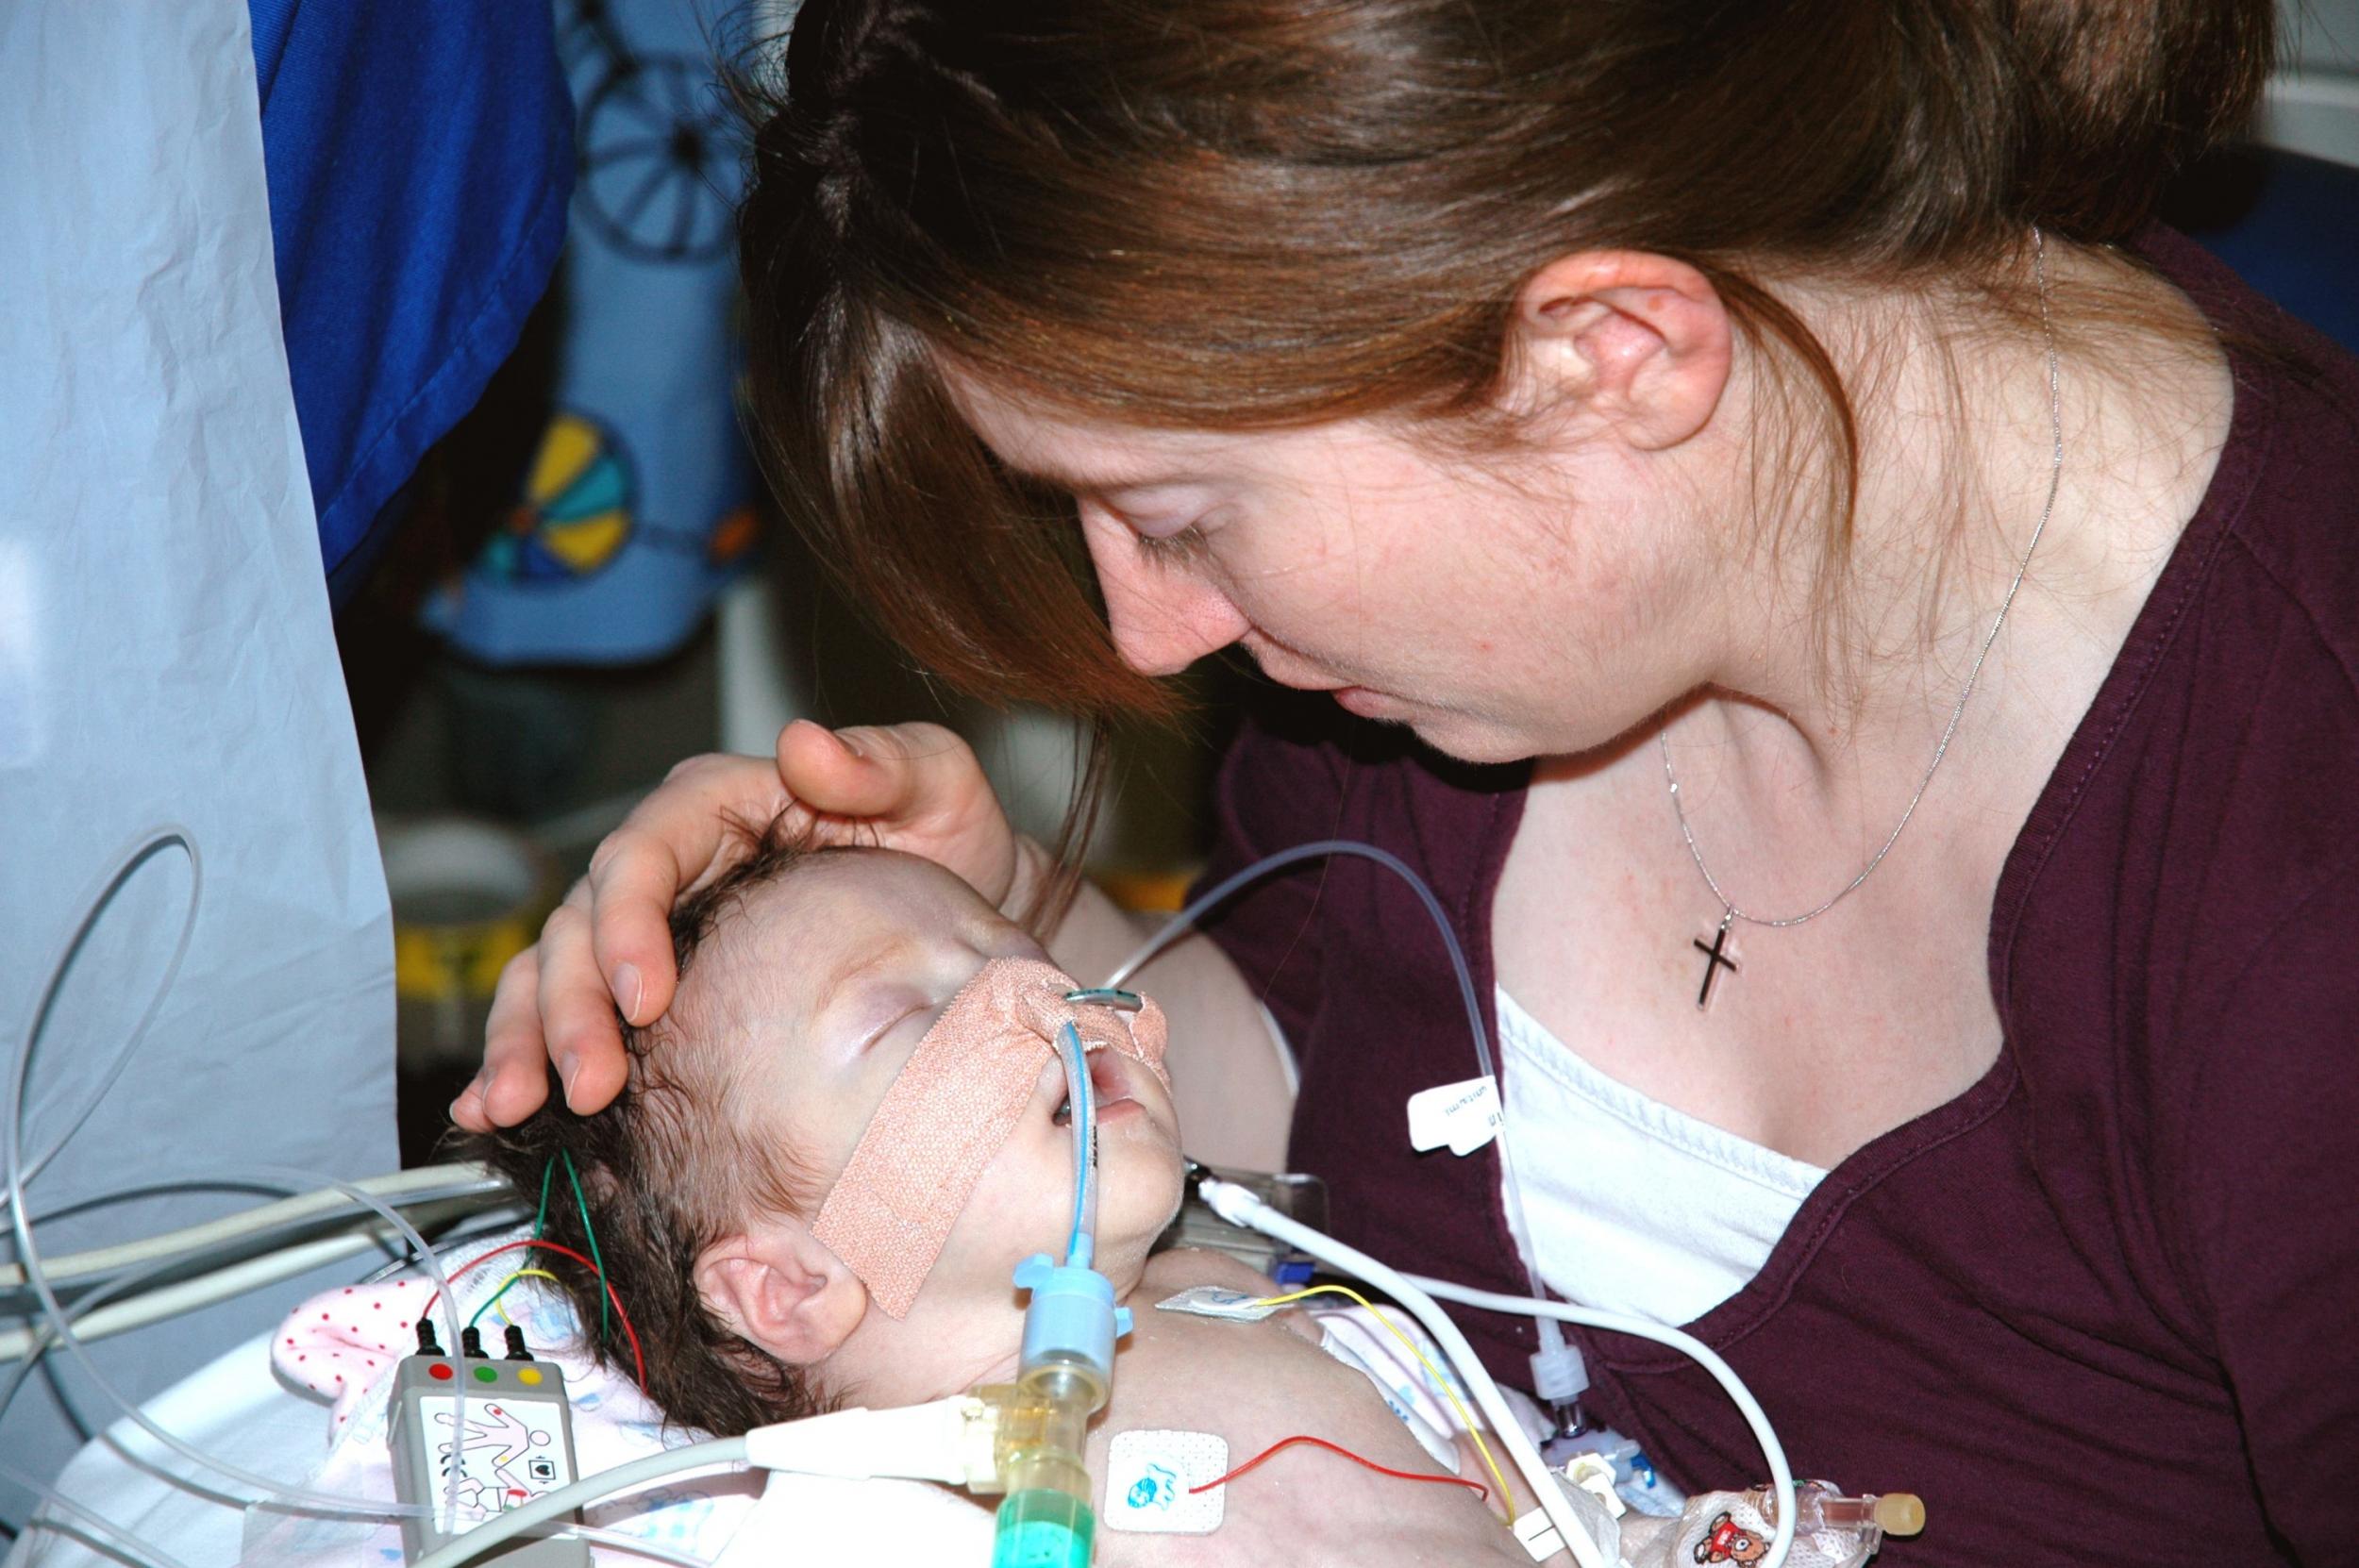 &#13;
Sarah became the youngest surviving heart transplant patient in the UK at the time of her operation&#13;